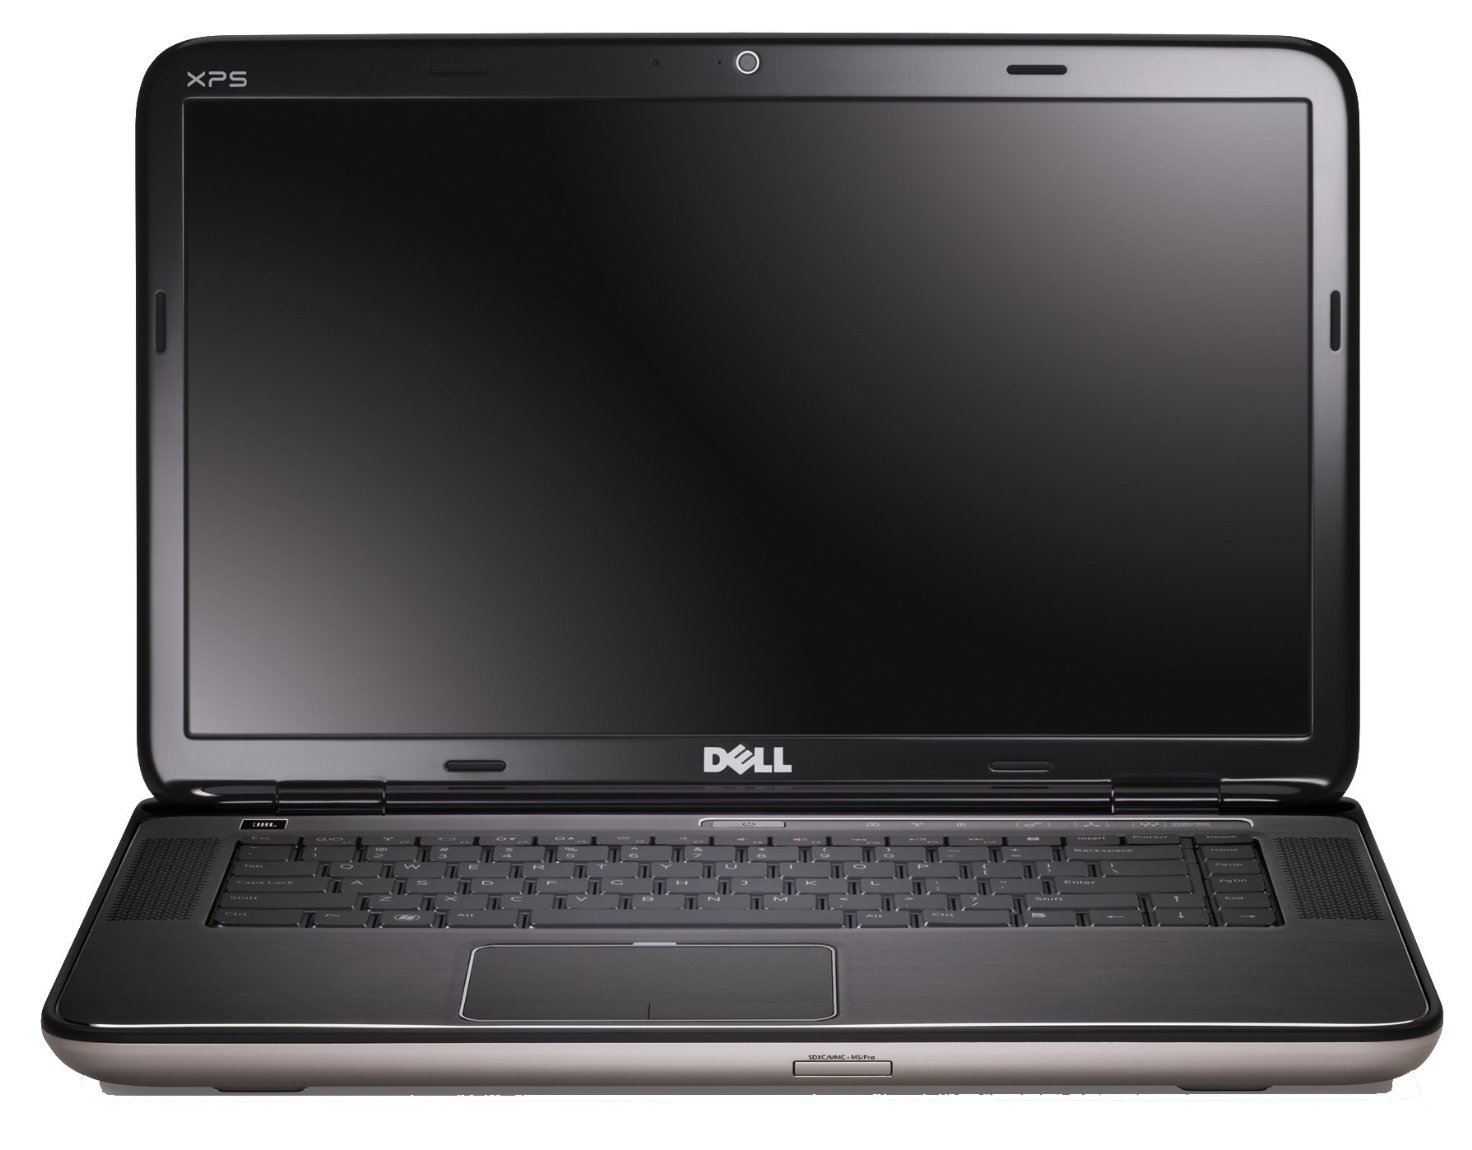   Dell XPS 15 (9570-5772)  1